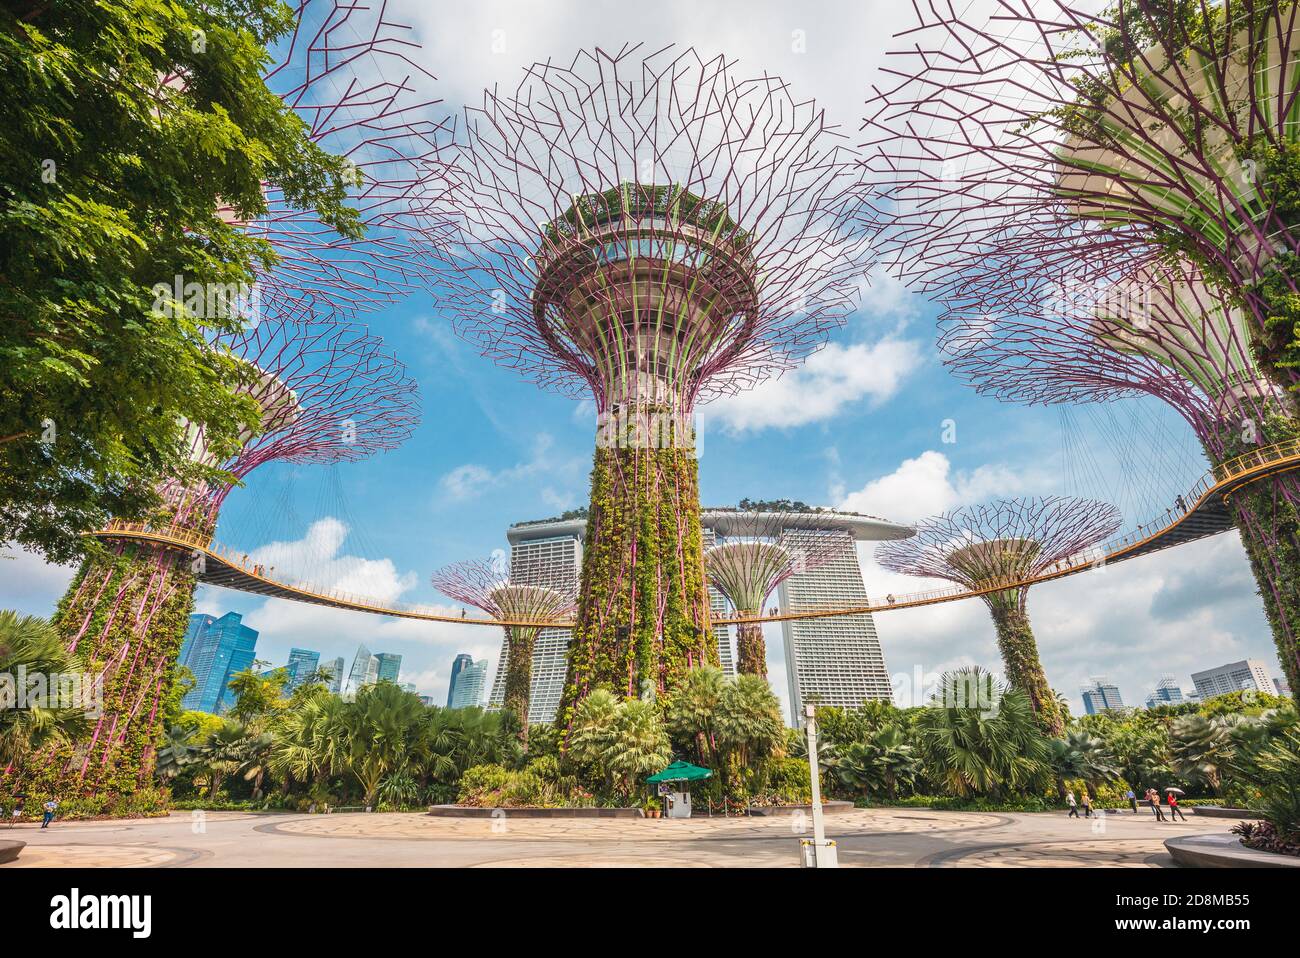 August 10, 2018: Supertree grove at marina bay garden in singapore, were conceived and designed by Grant Associates. Each supertree has its own plante Stock Photo